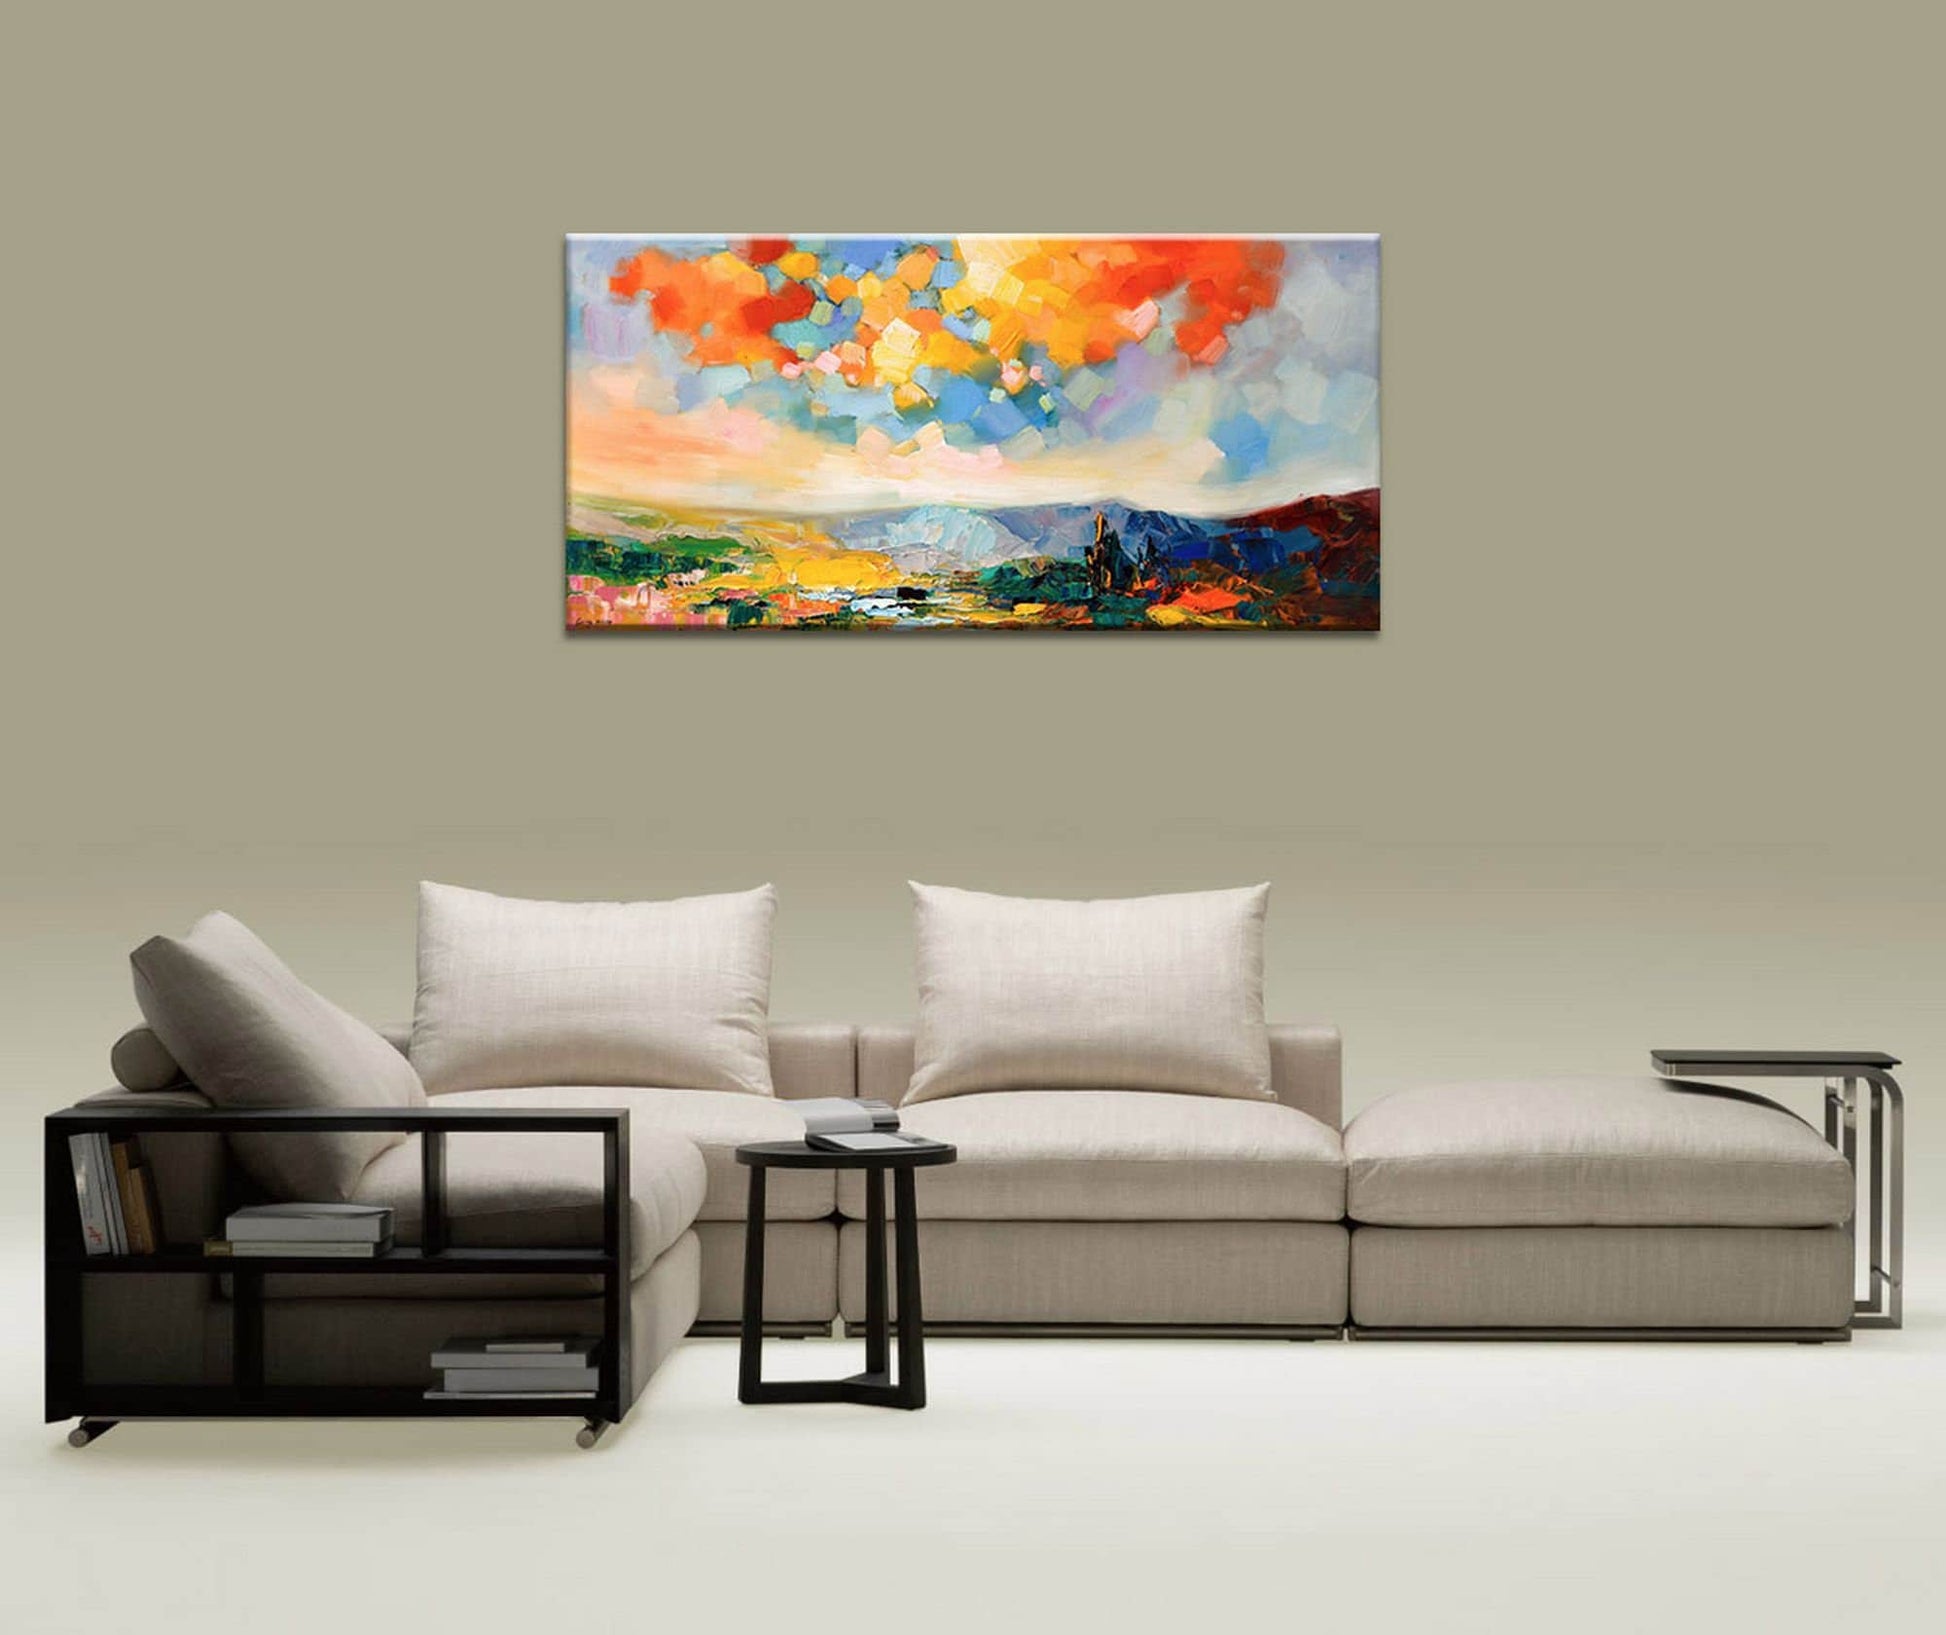 Oil Painting Original, Contemporary Art, Coffee Wall Art, Large Abstract Painting, Original Landscape Oil Paintings, Art Decor, Canvas Art